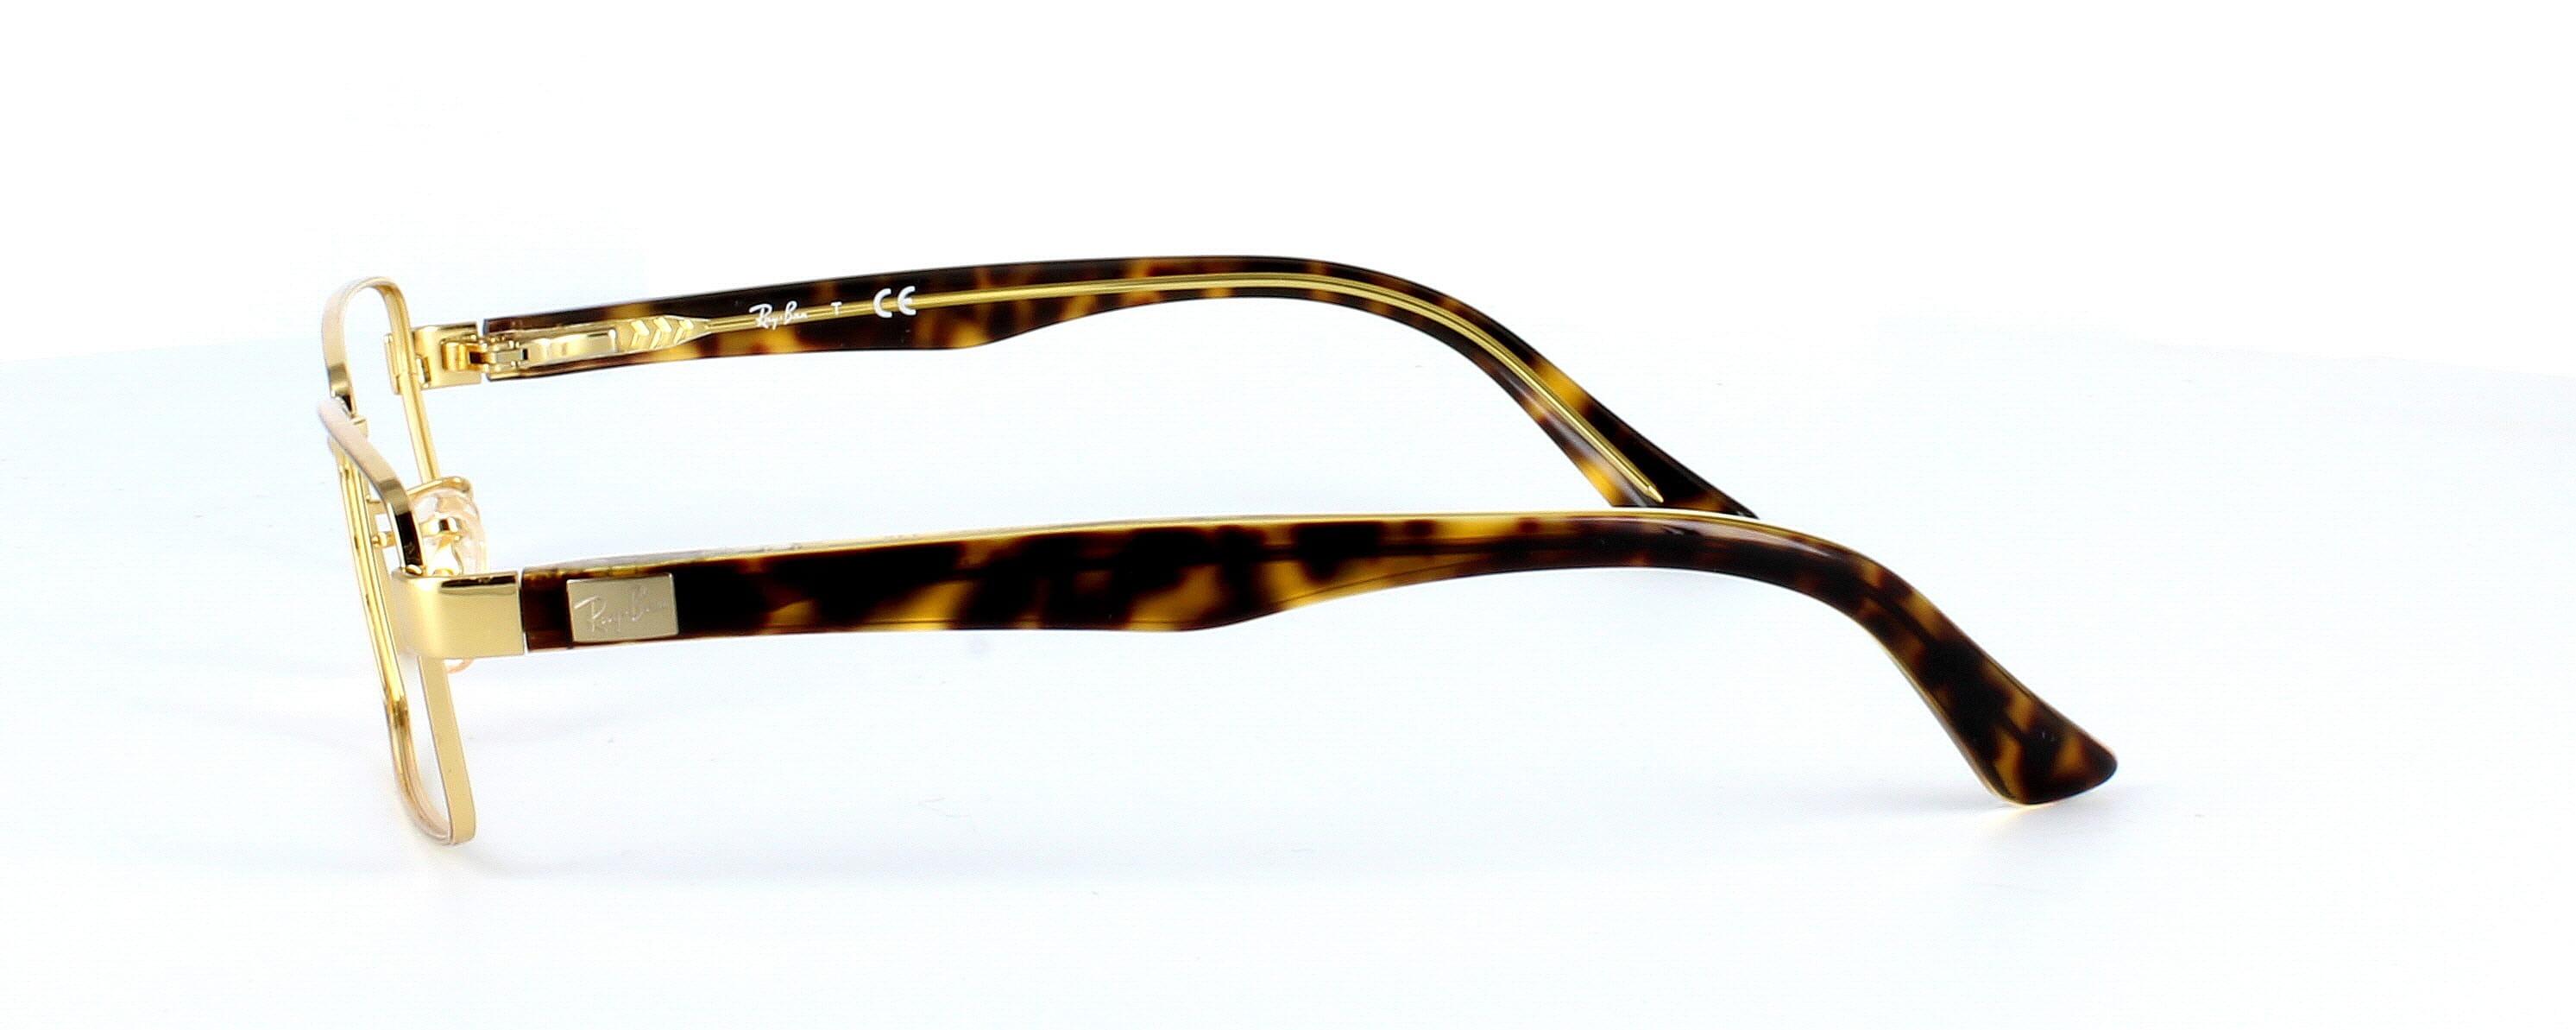 Ray Ban 62701 Gold - Gent's narrow full metal rectangular shaped glasses in gold - image view 3